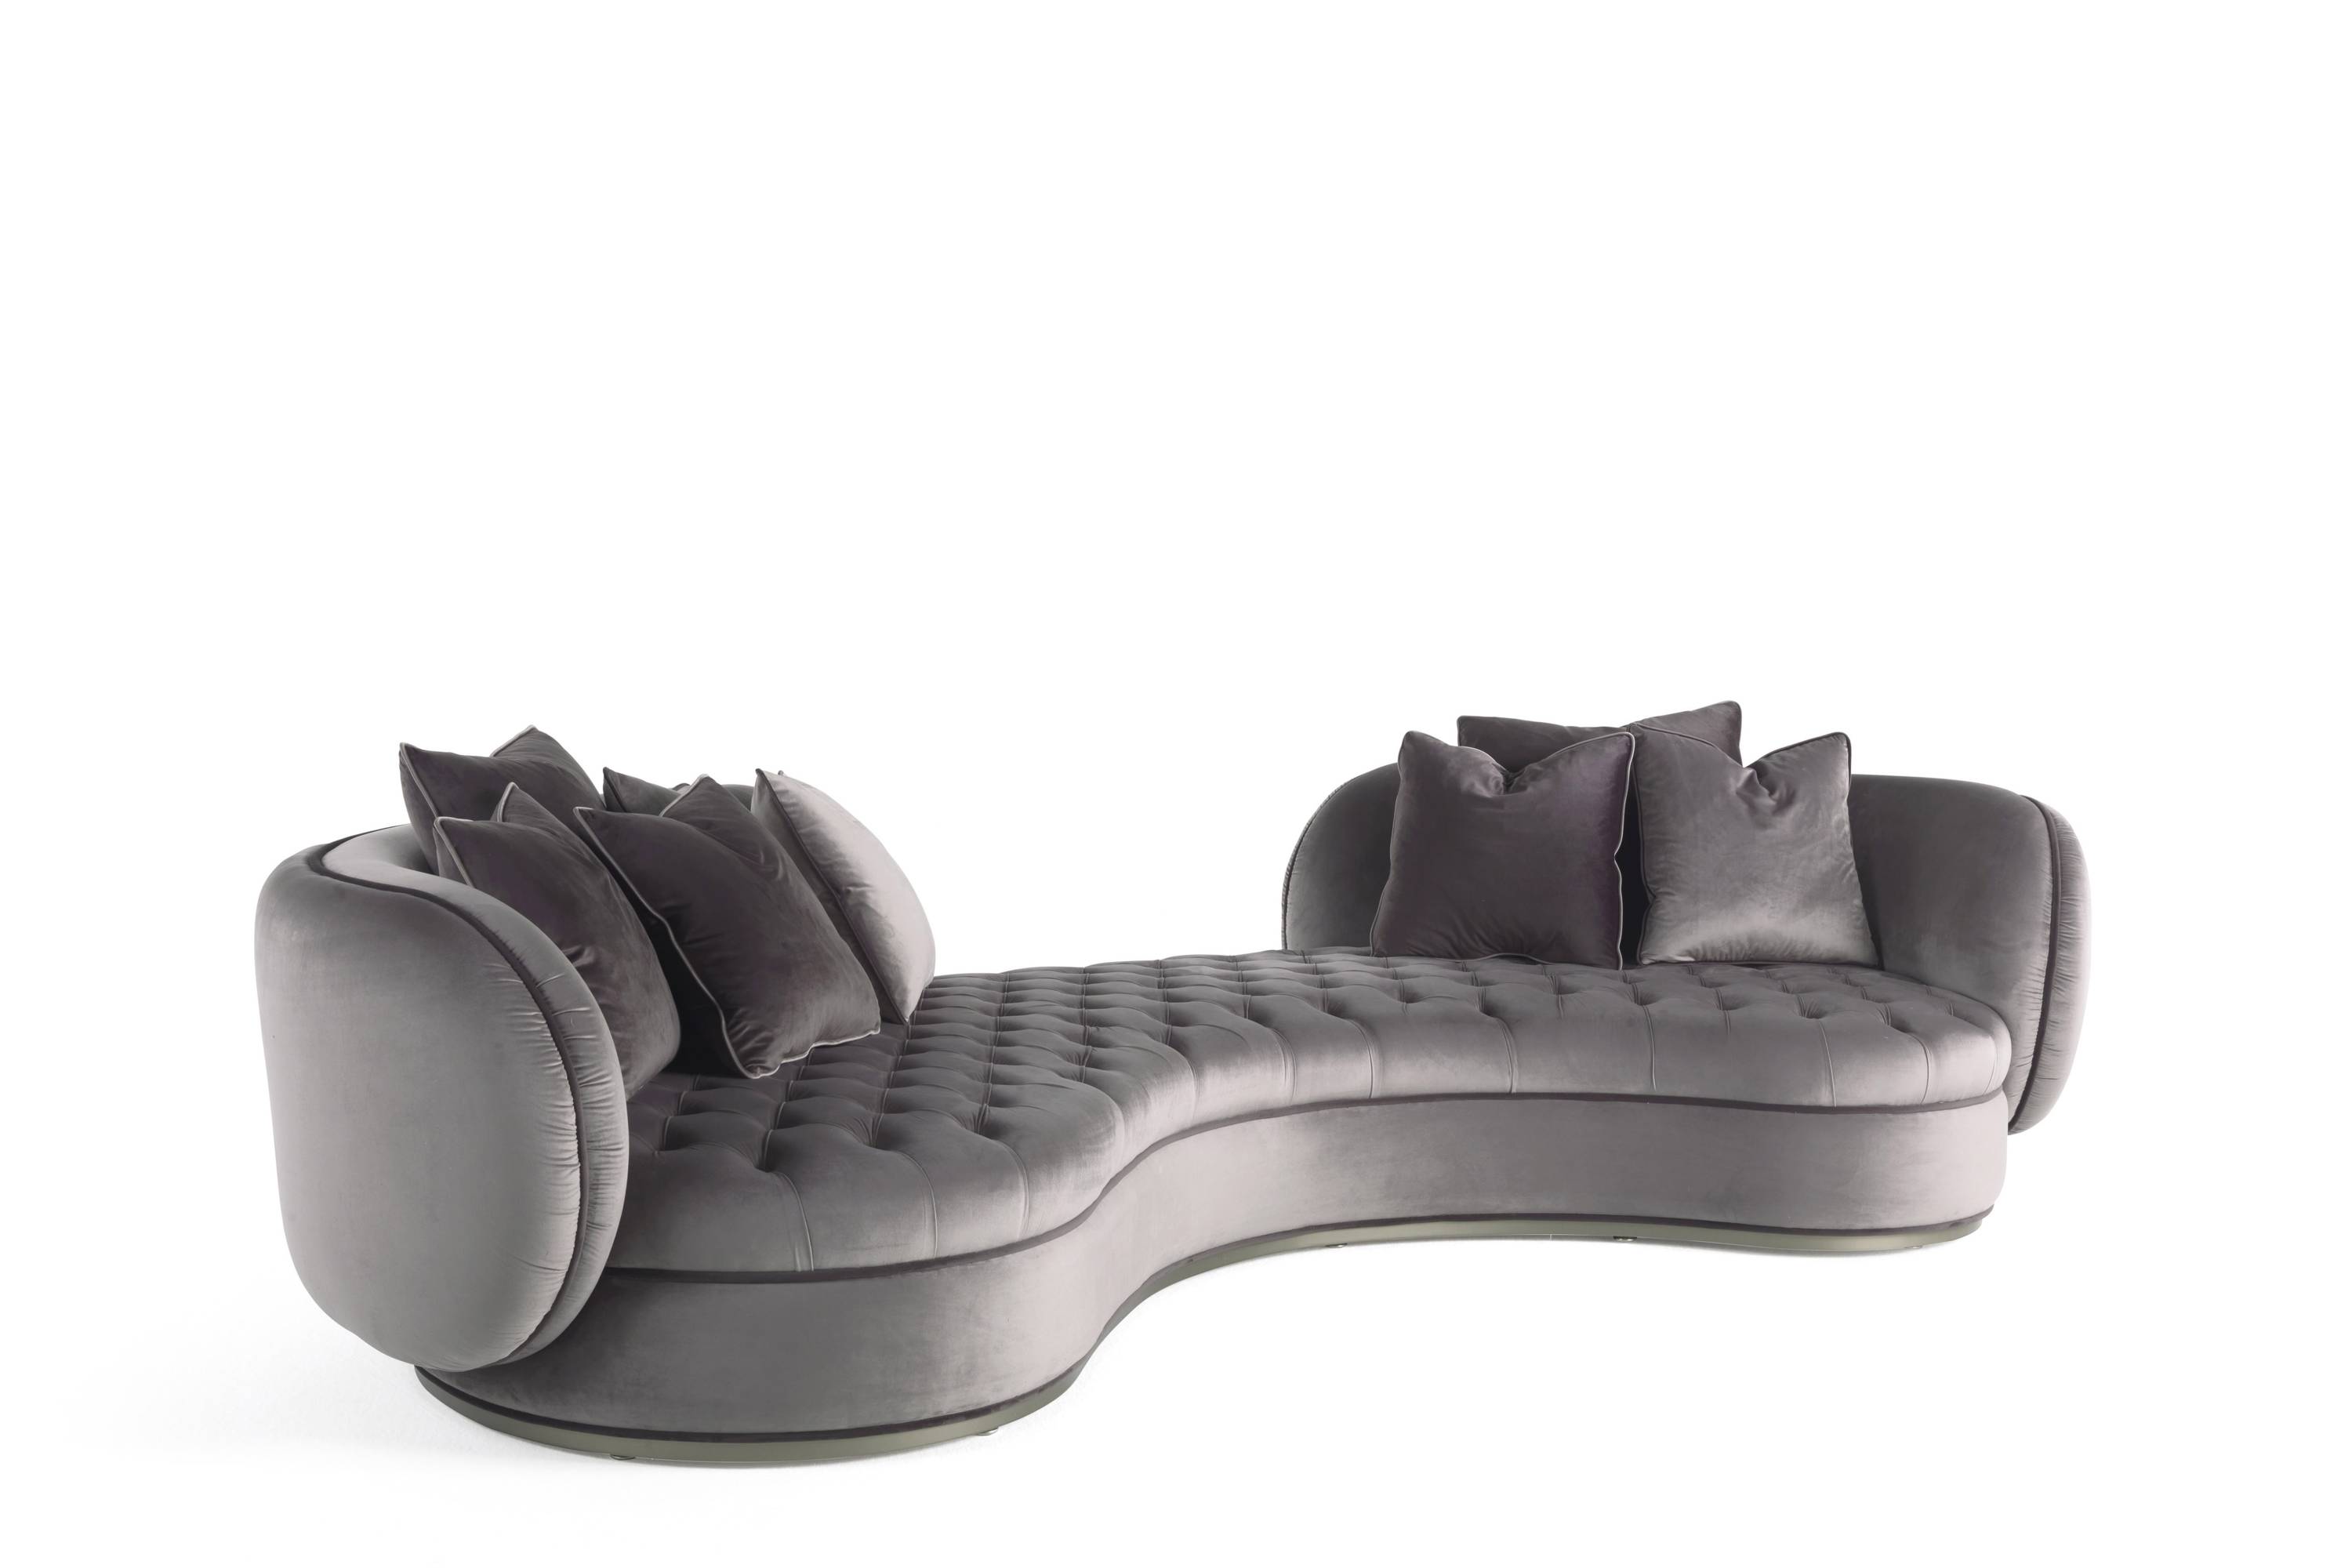 TOKYO 3-seater sofa - Bespoke projects with luxury Made in Italy classic furniture